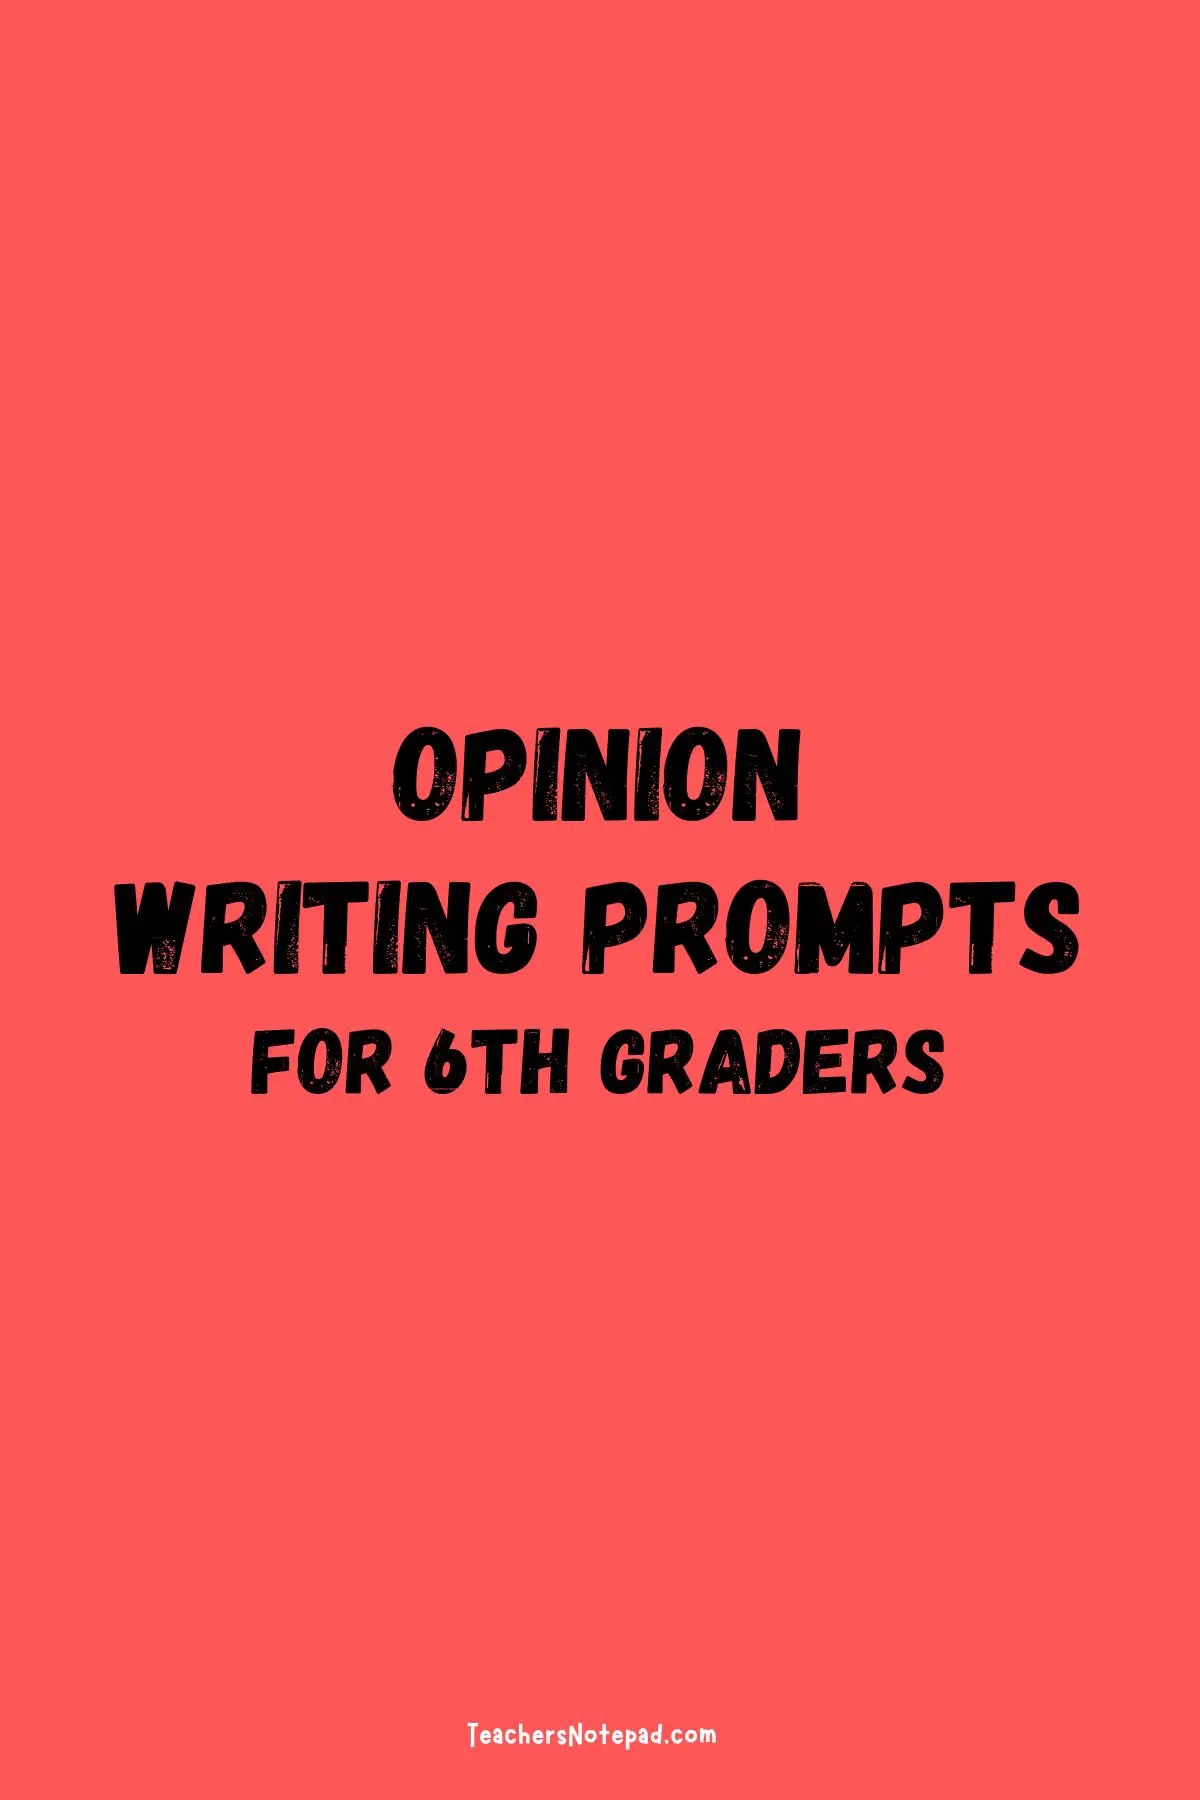 6th grade writing prompts opinion